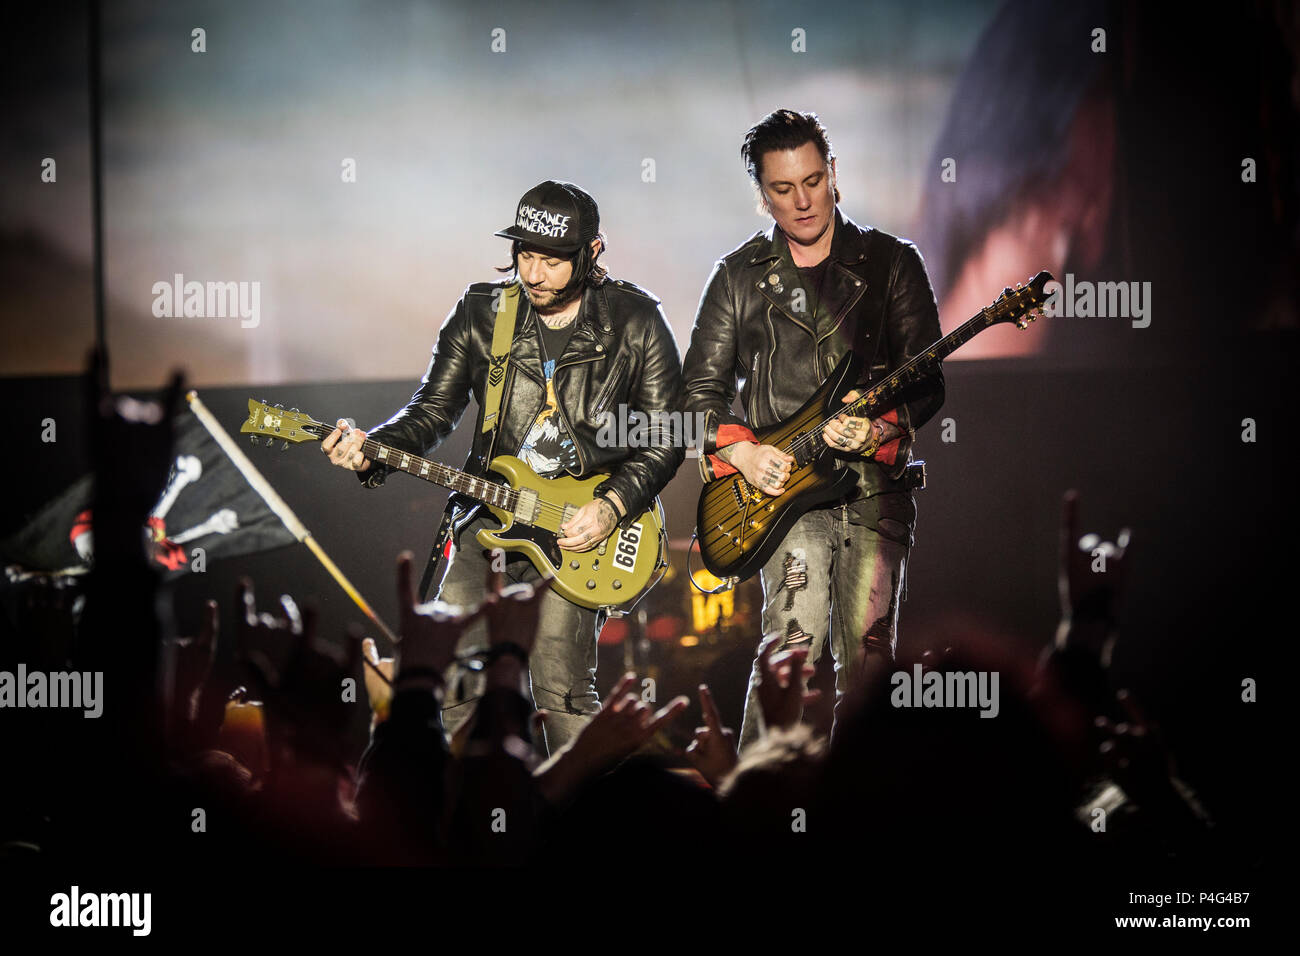 Avenged Sevenfold Live The Stage World Tour 2018 